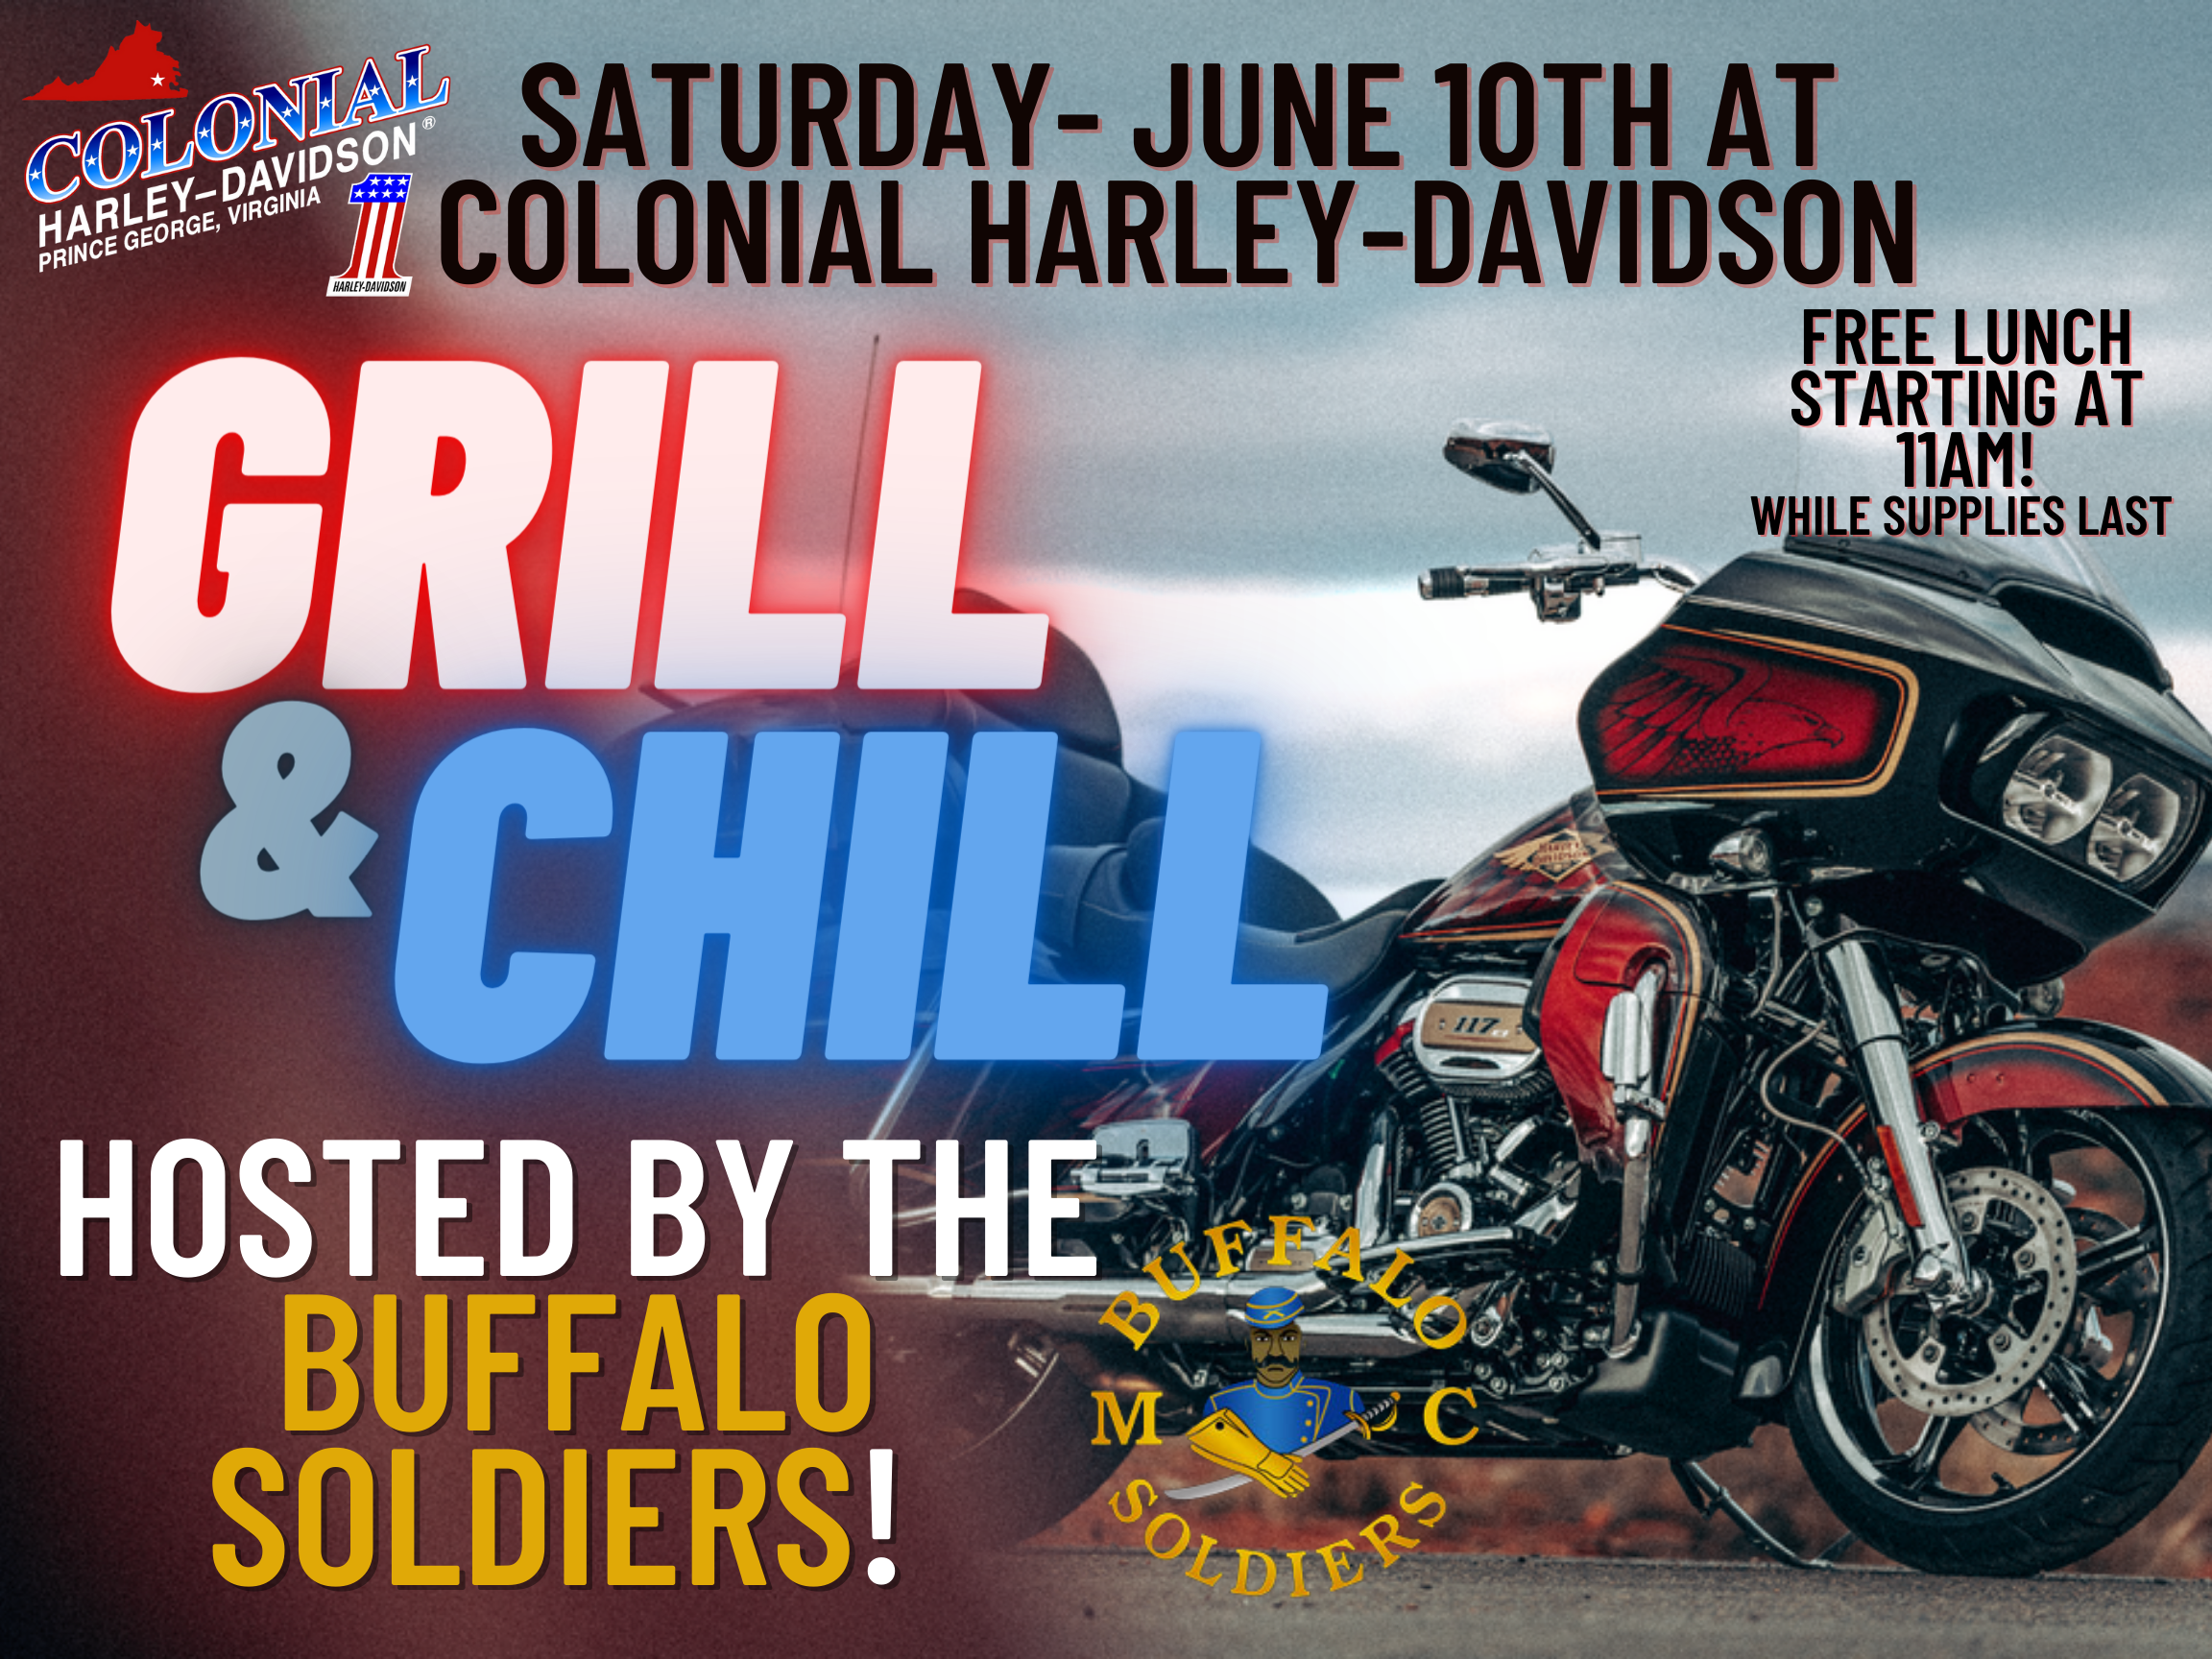 Buffalo-Soldiers-June-10-Event-11469